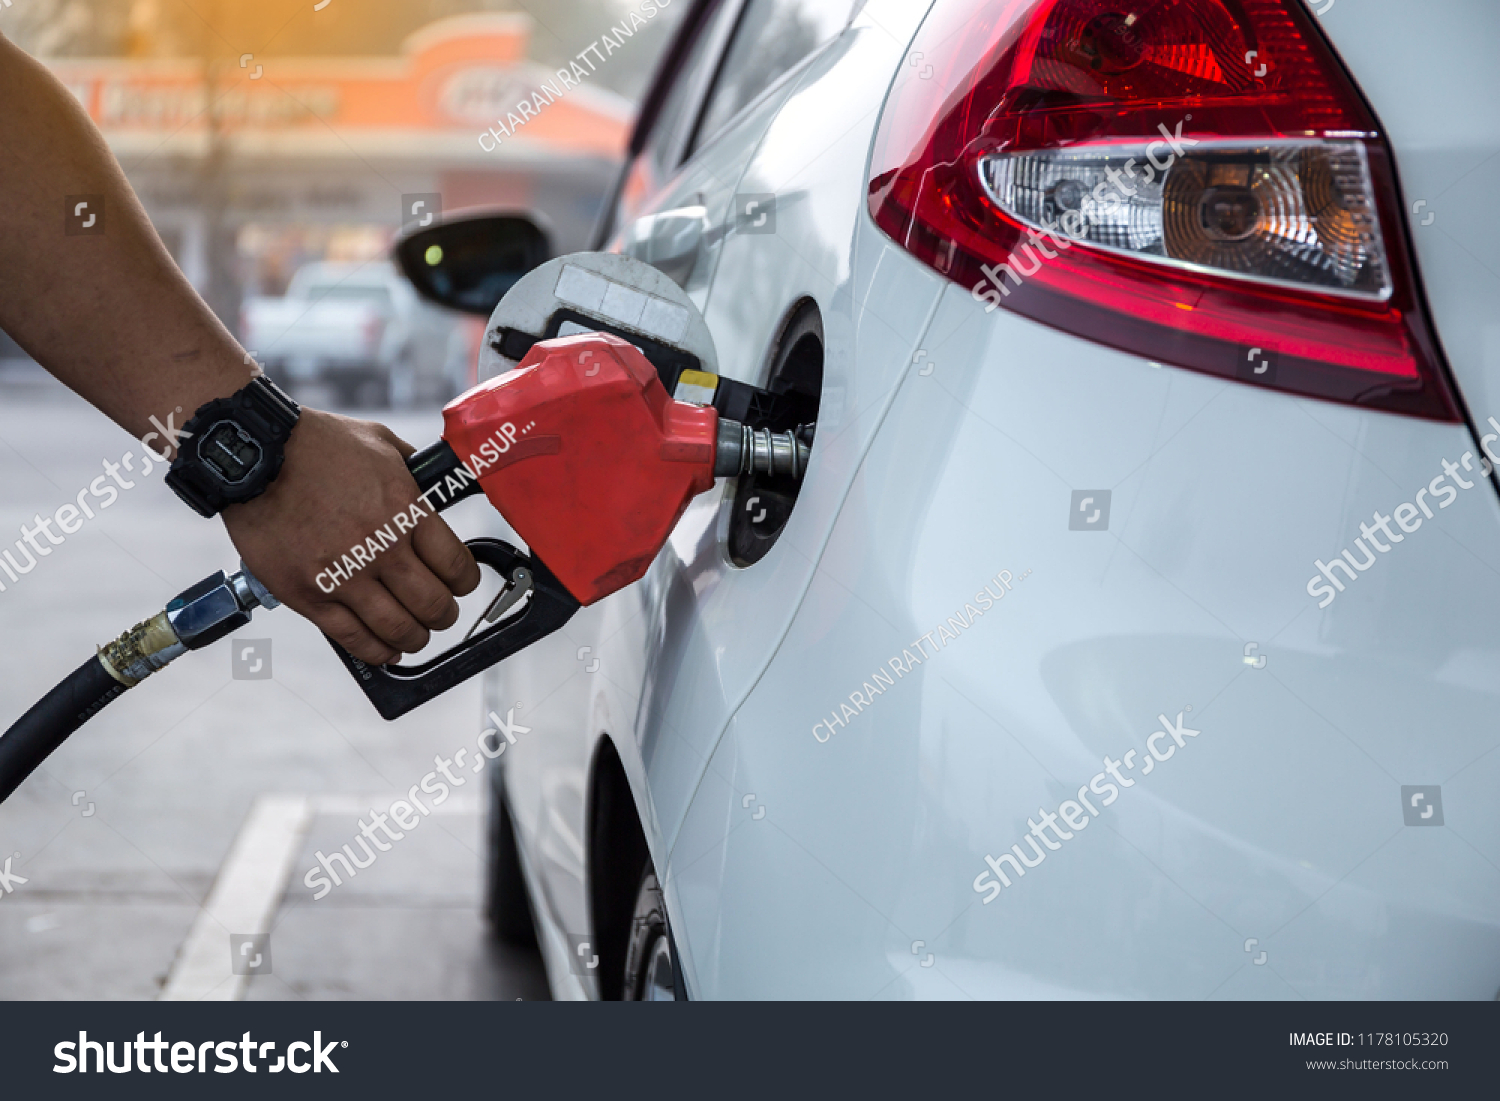 Closeup of woman pumping gasoline fuel in car at gas station. Petrol or gasoline being pumped into a motor vehicle car.
 #1178105320